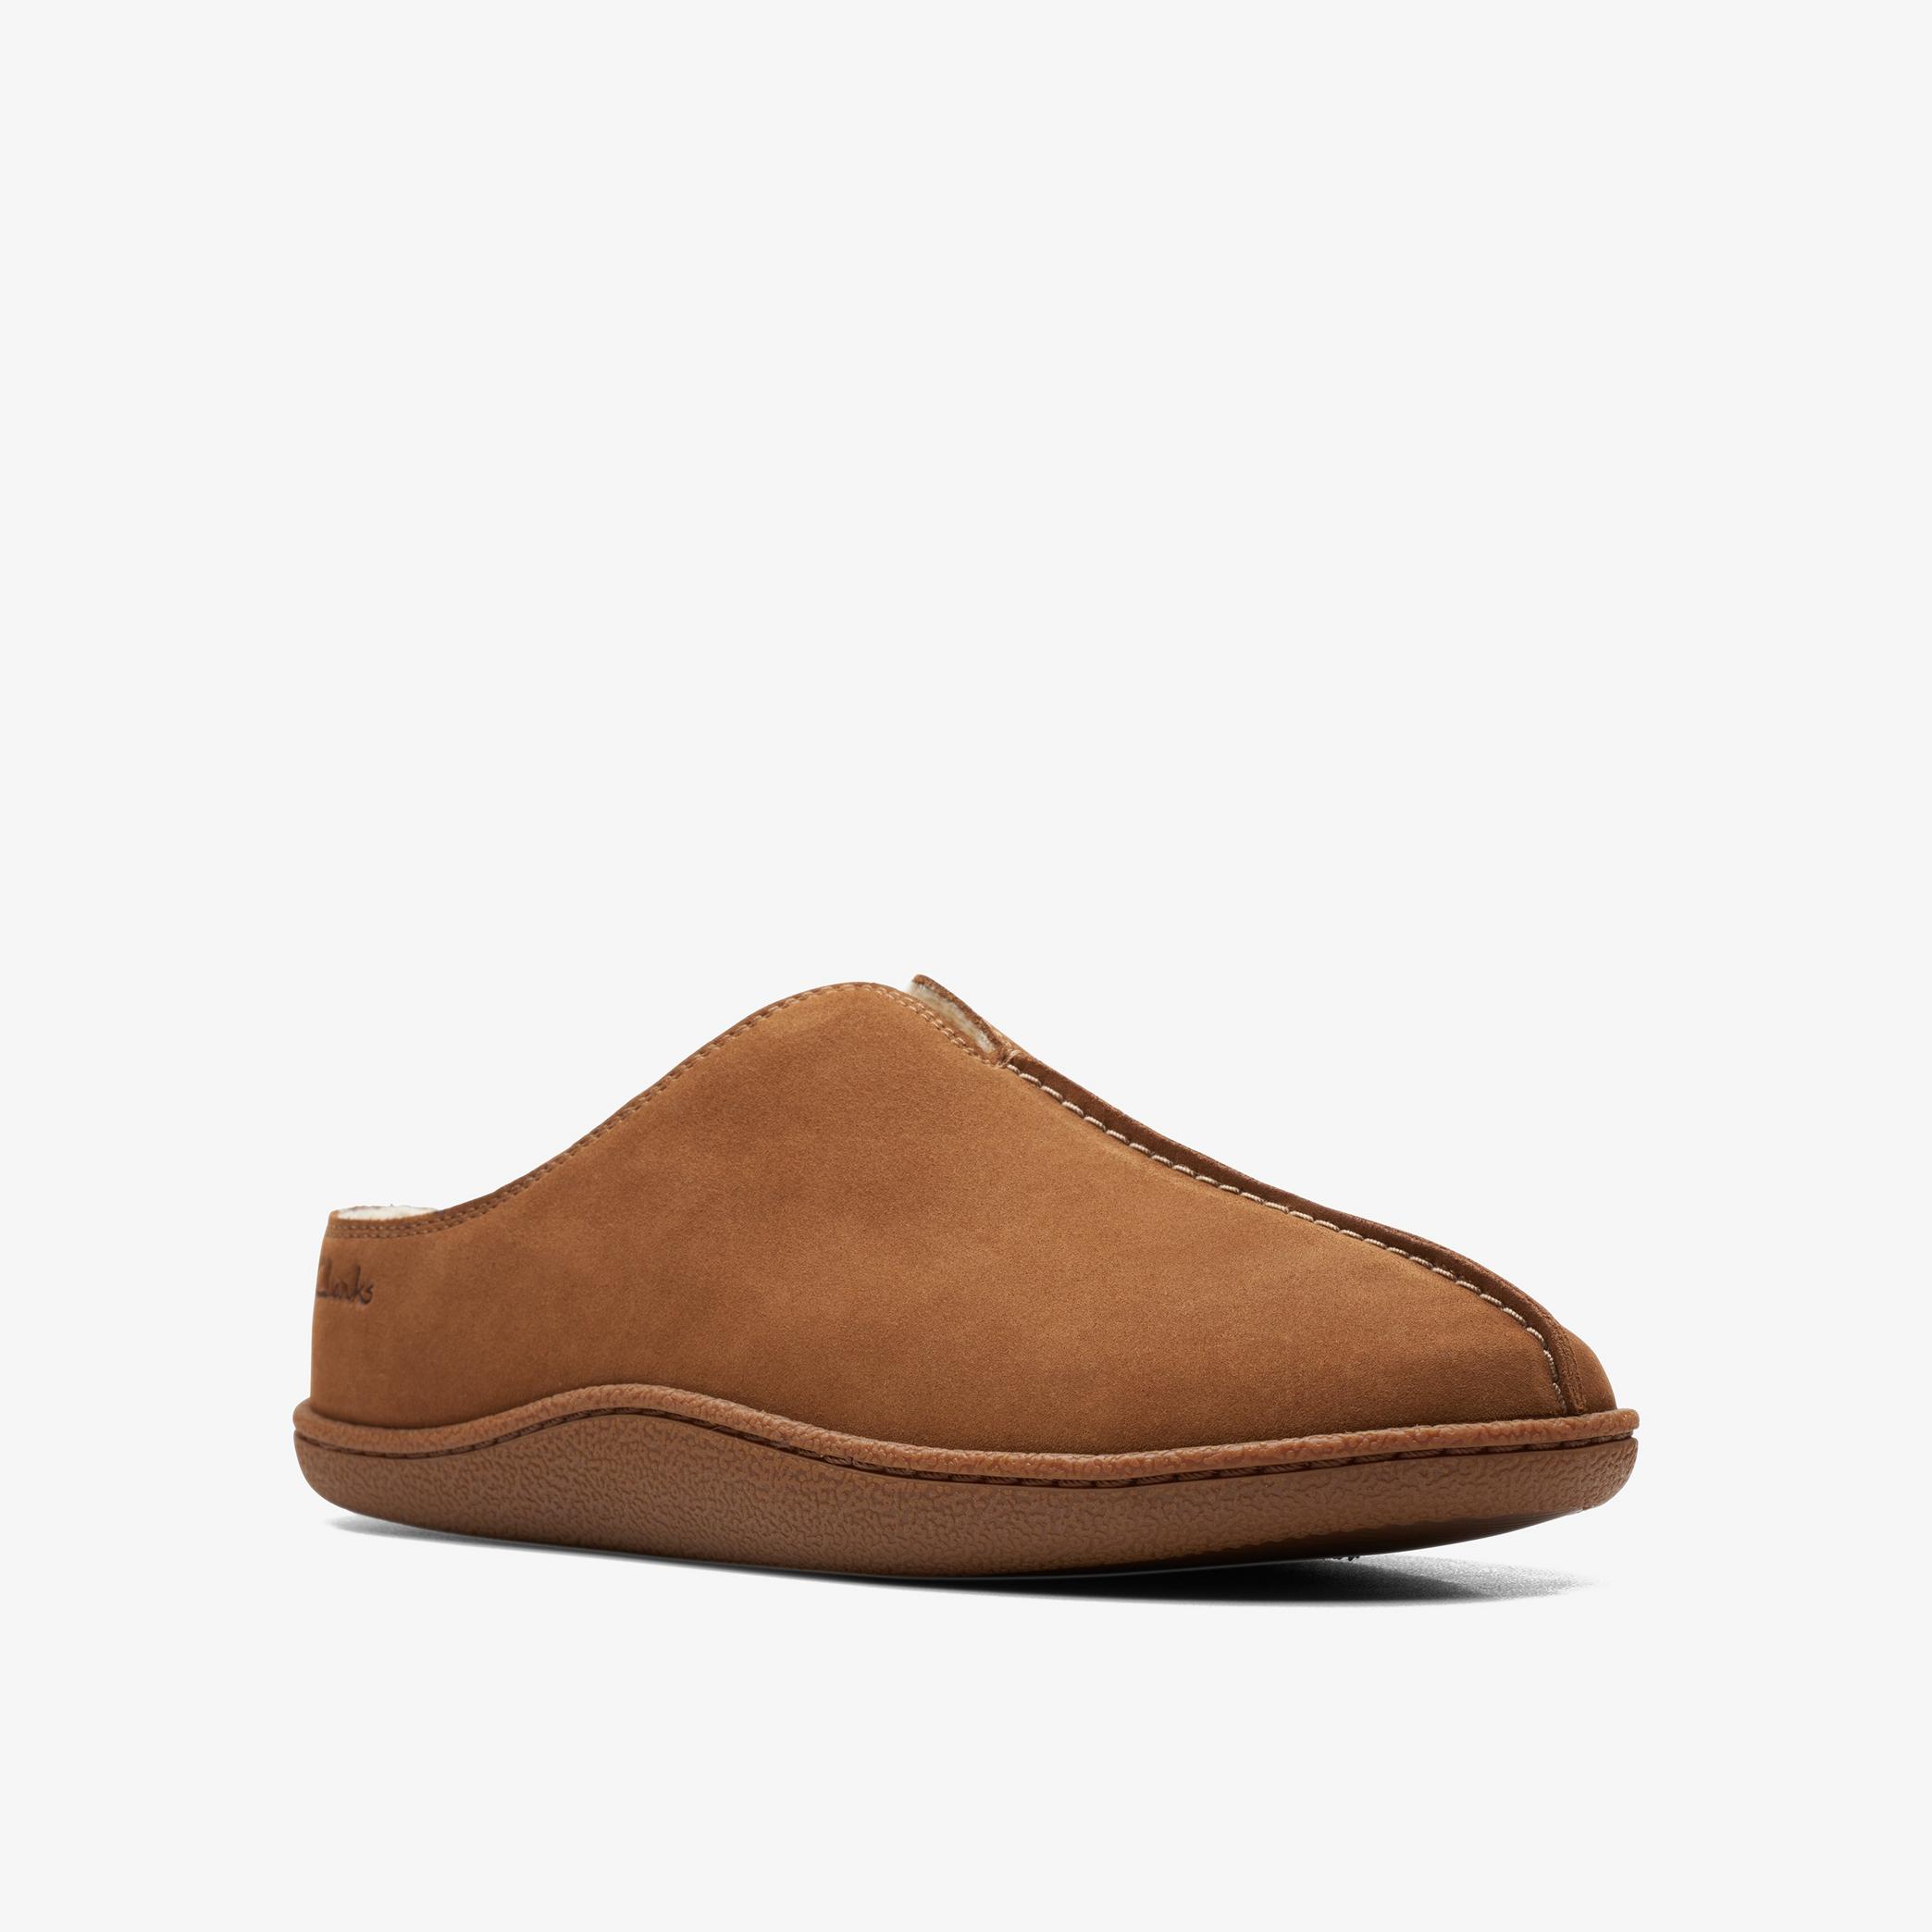 Home Mule Tan Suede Slippers, view 3 of 6